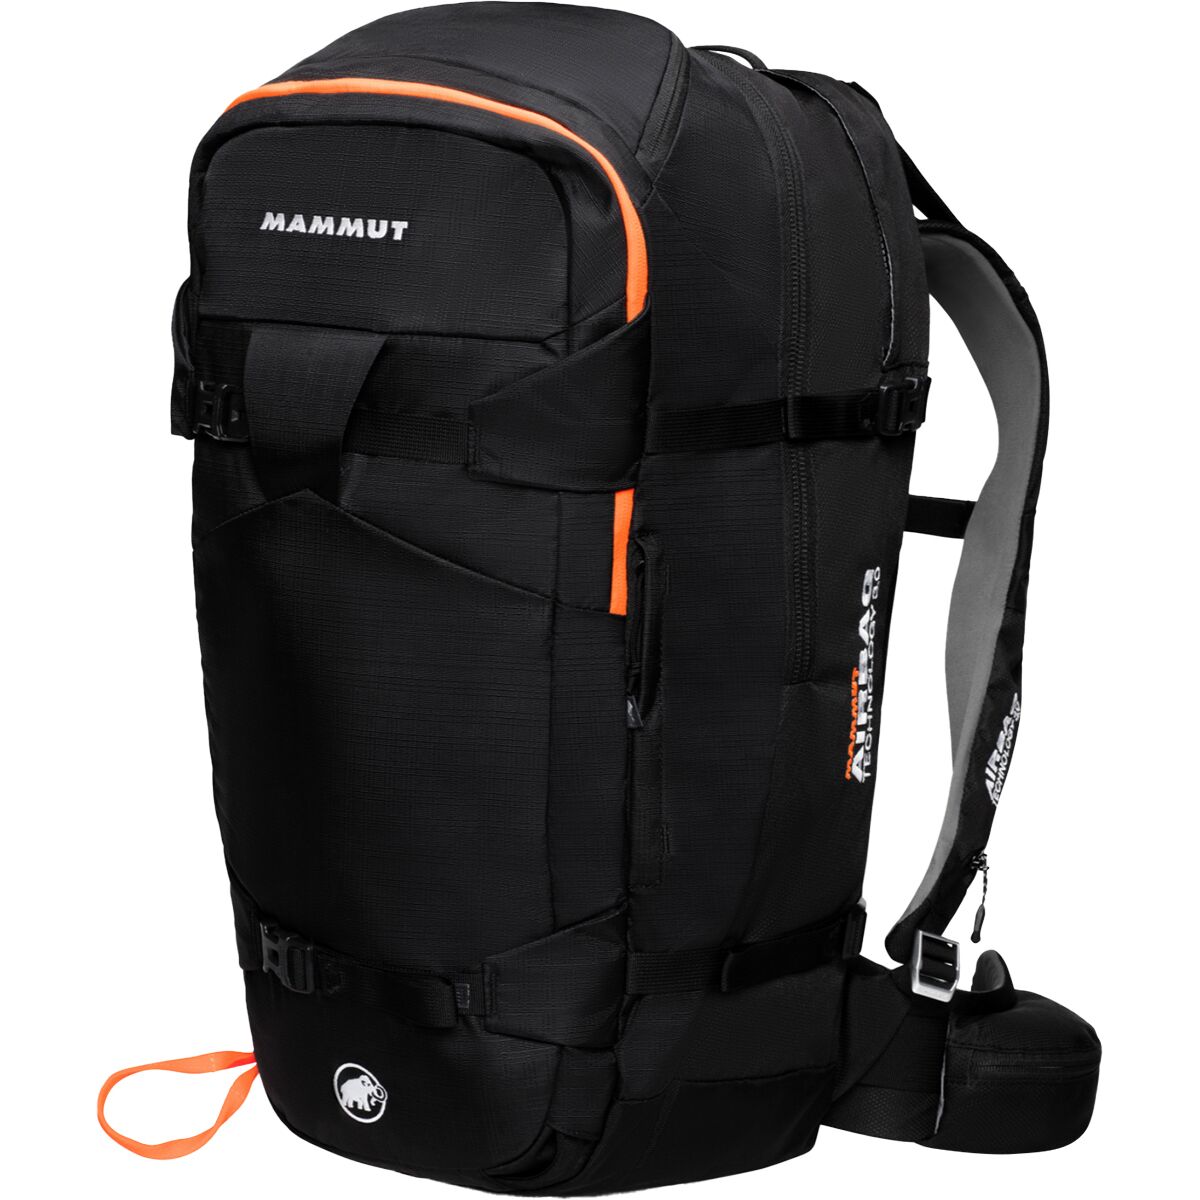 Mammut Pro 35-45L Removable Airbag 3.0 Backpack